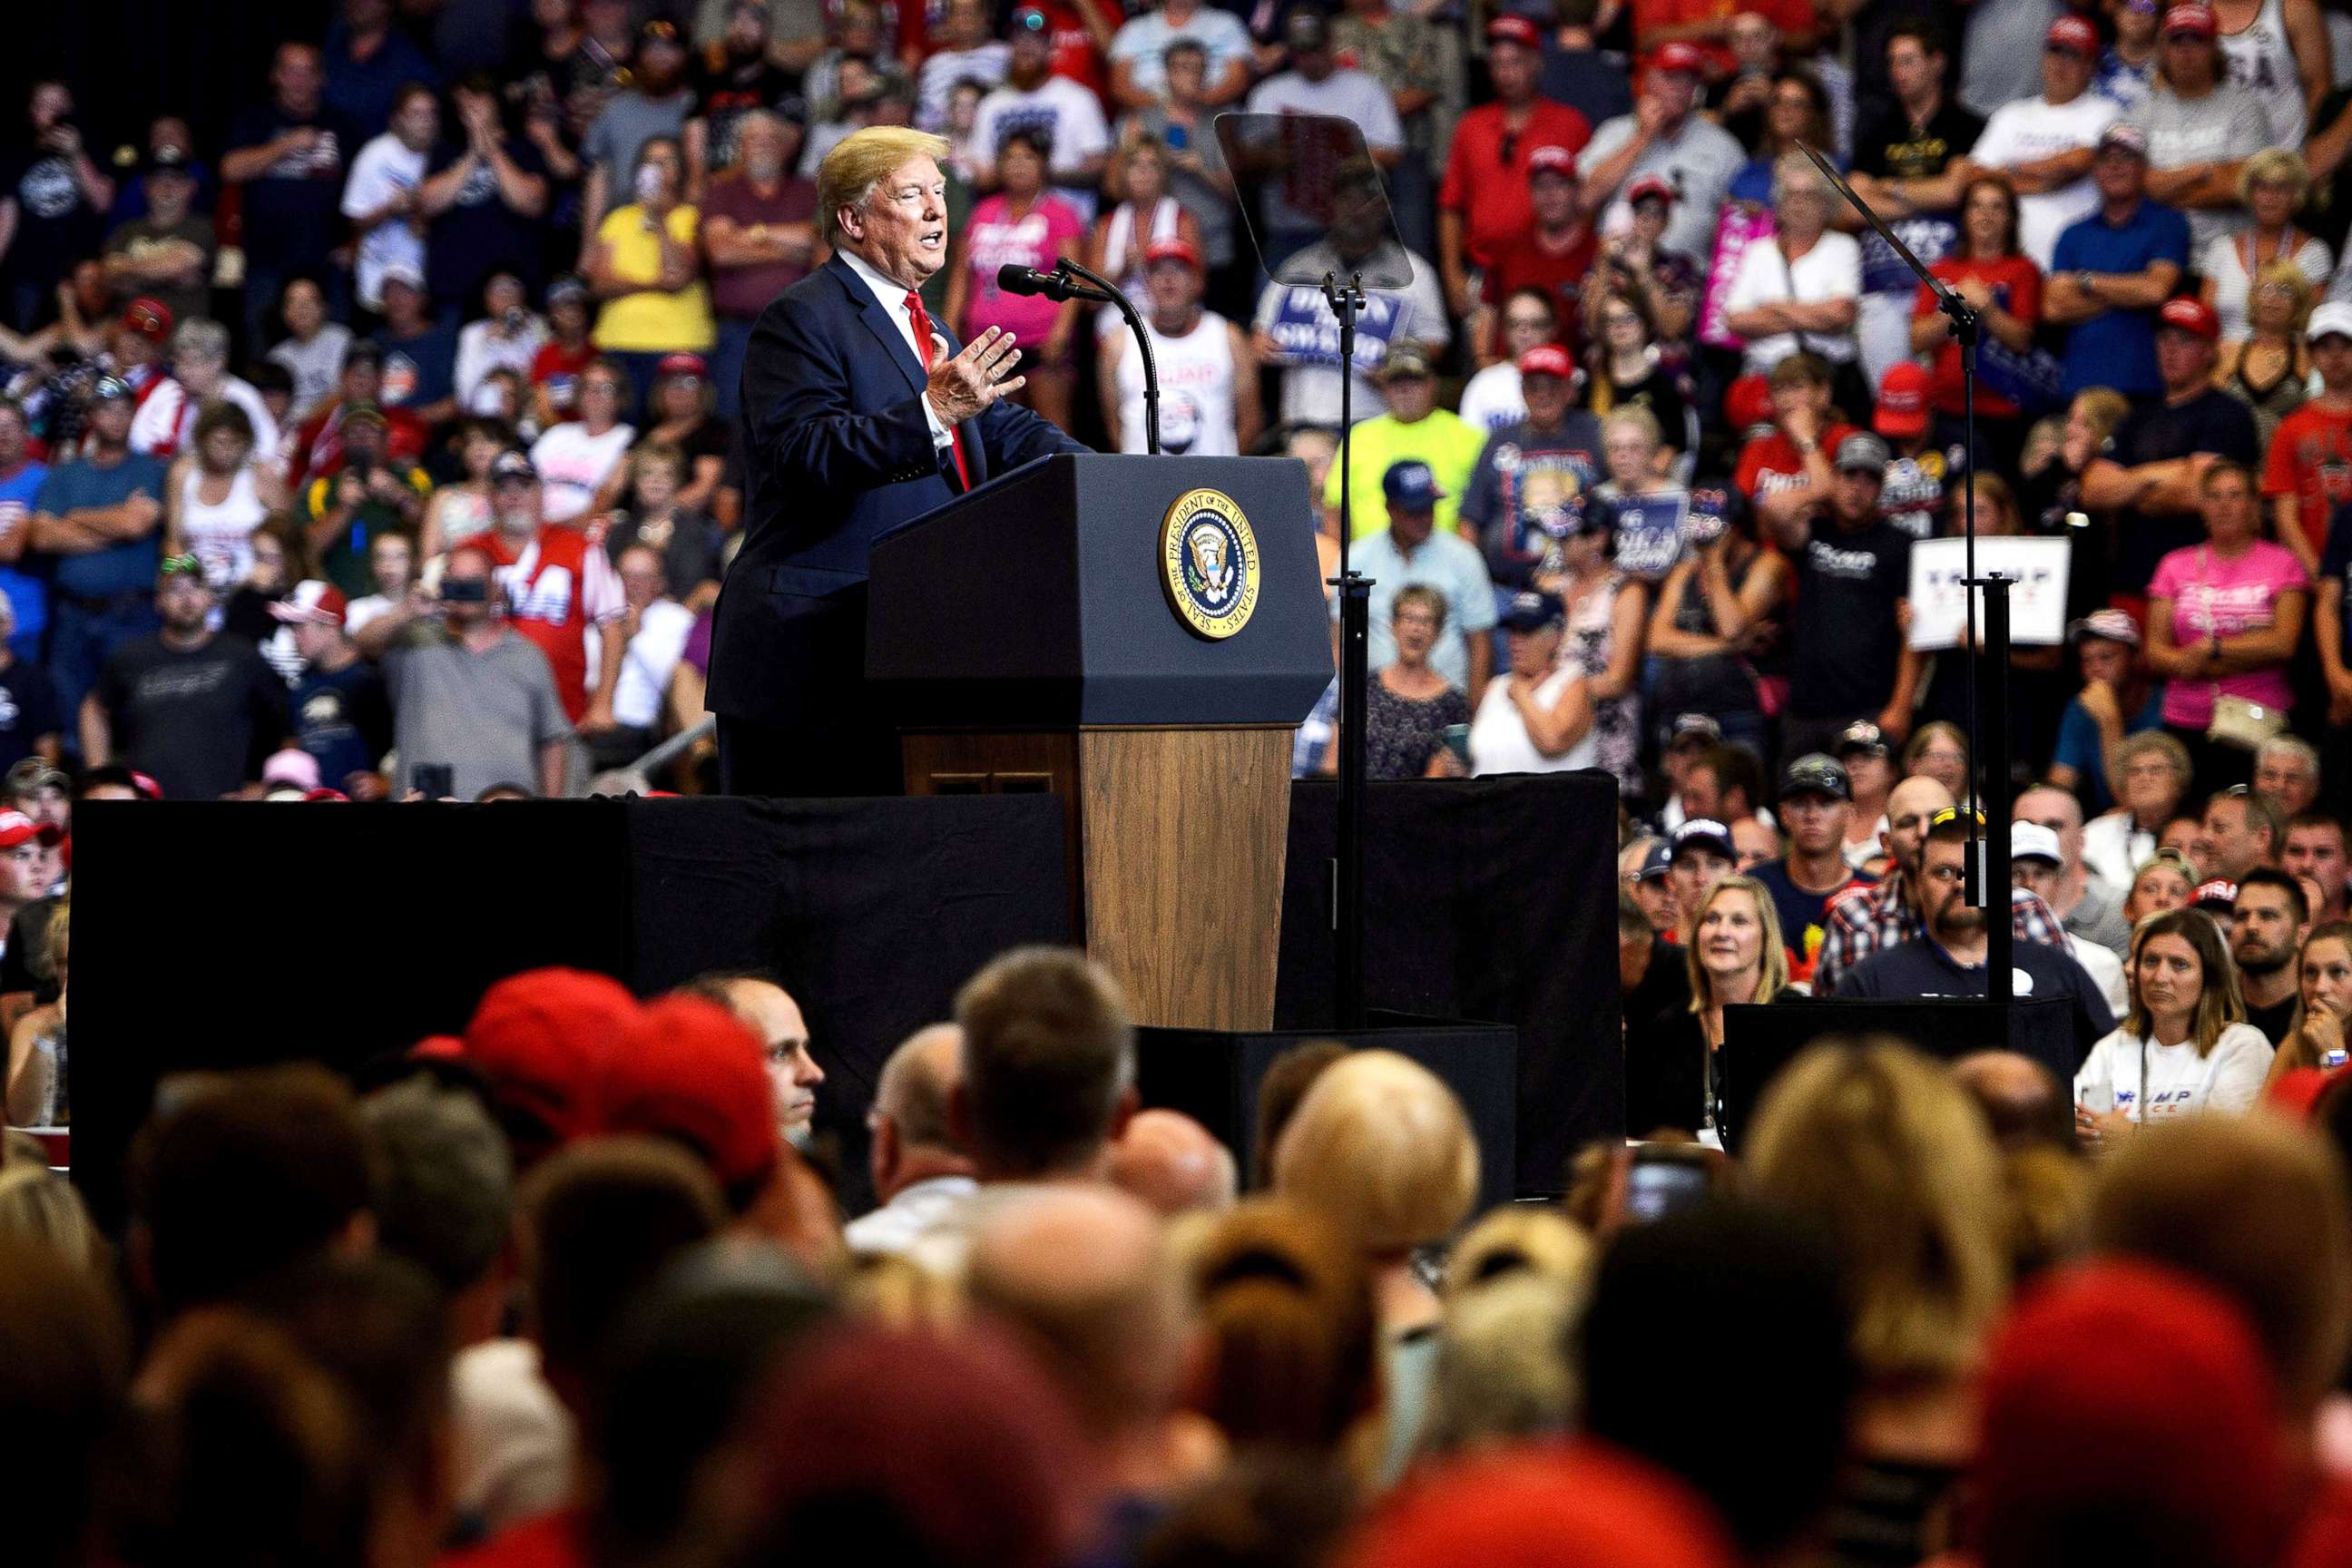 PHOTO: President Donald Trump speaks during a rally for Rep. Kevin Cramer on June 27, 2018, in Fargo, N.D.